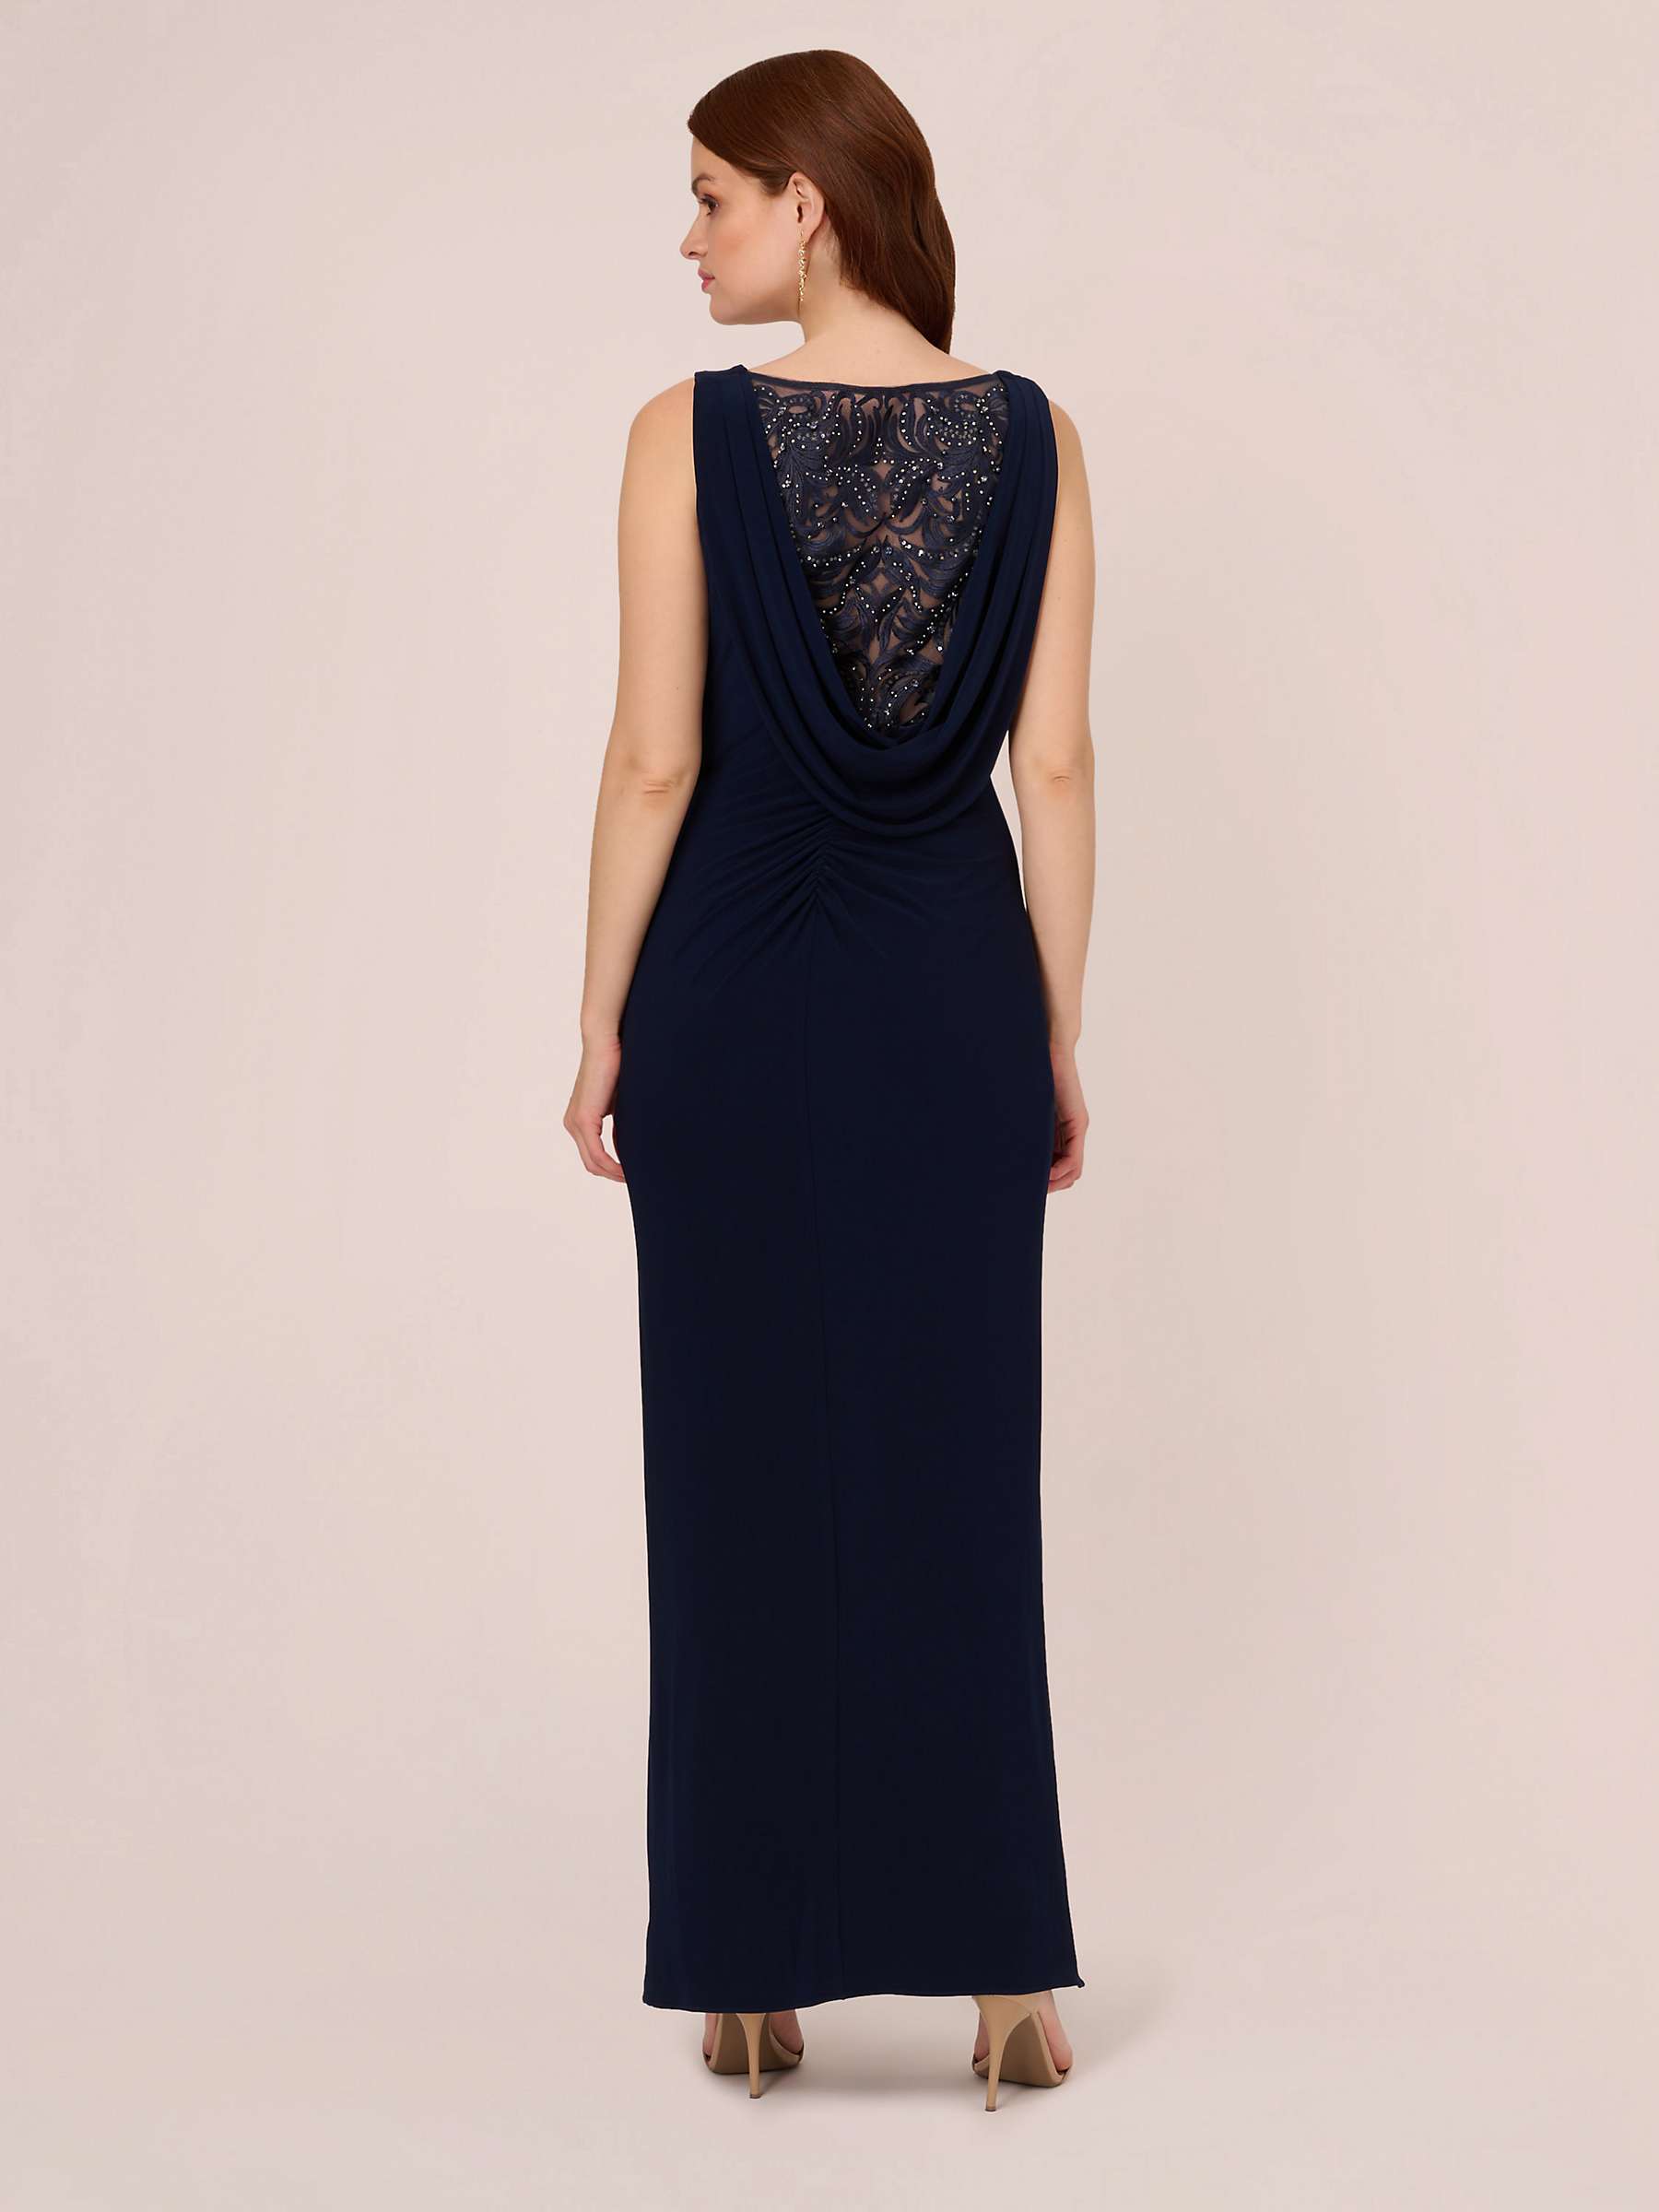 Buy Adrianna Papell Embellished Back Jersey Dress, Midnight Online at johnlewis.com